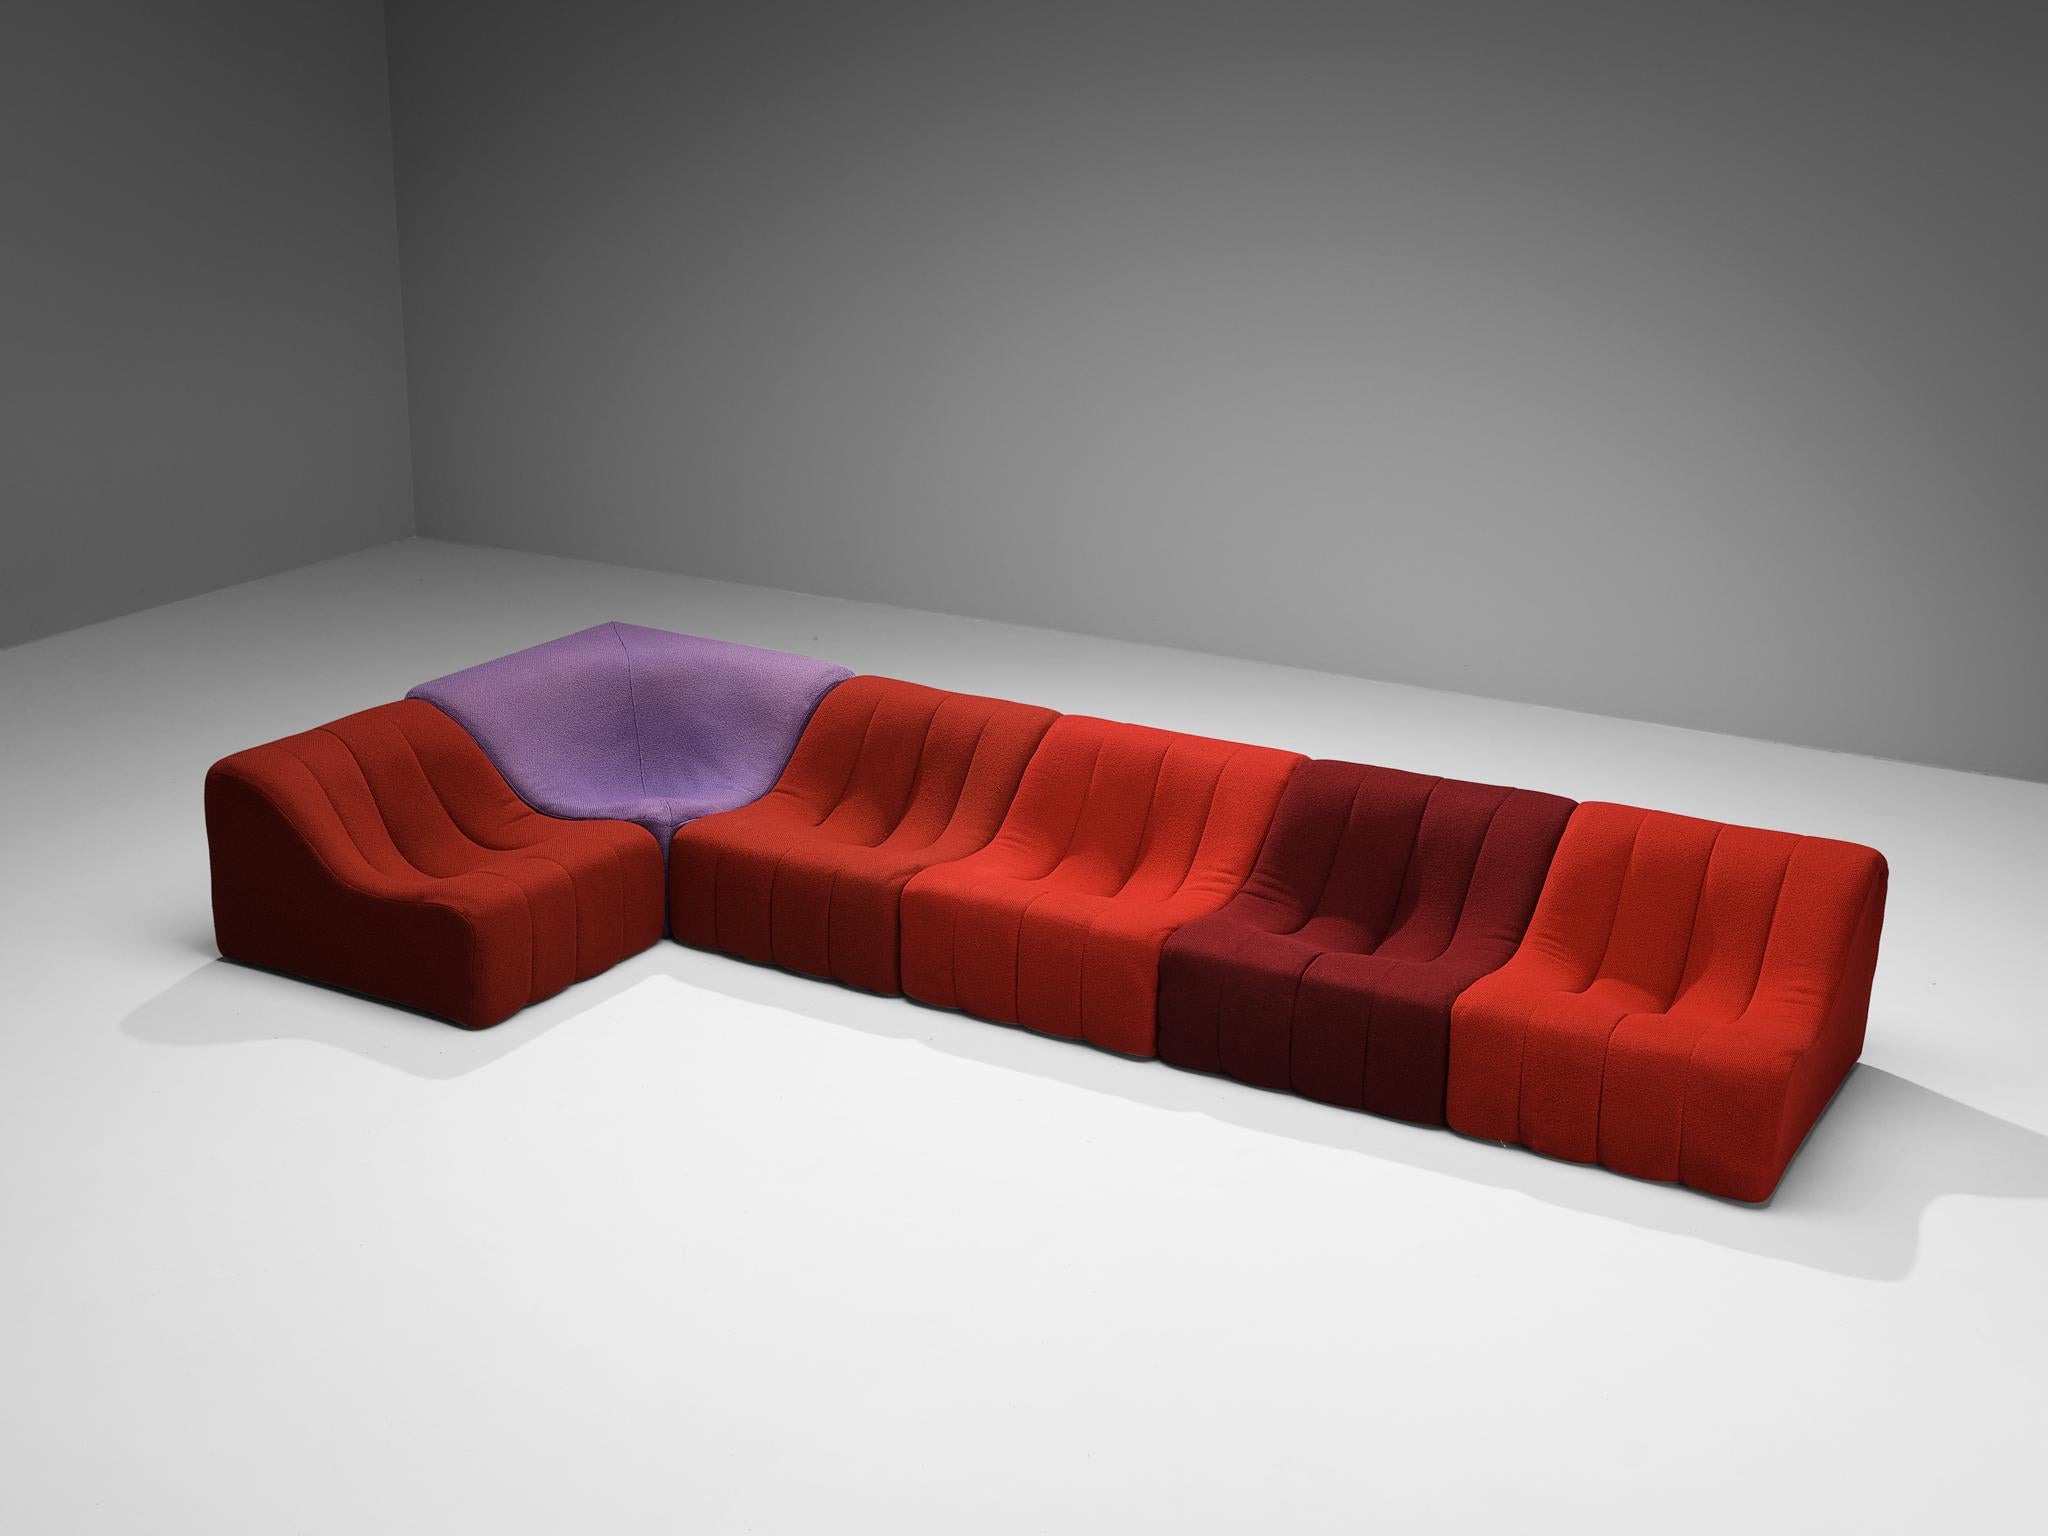 Kwok Hoi Chan for Steiner 'Chromatic' Modular Sofa in Red Purple Colors  For Sale 4